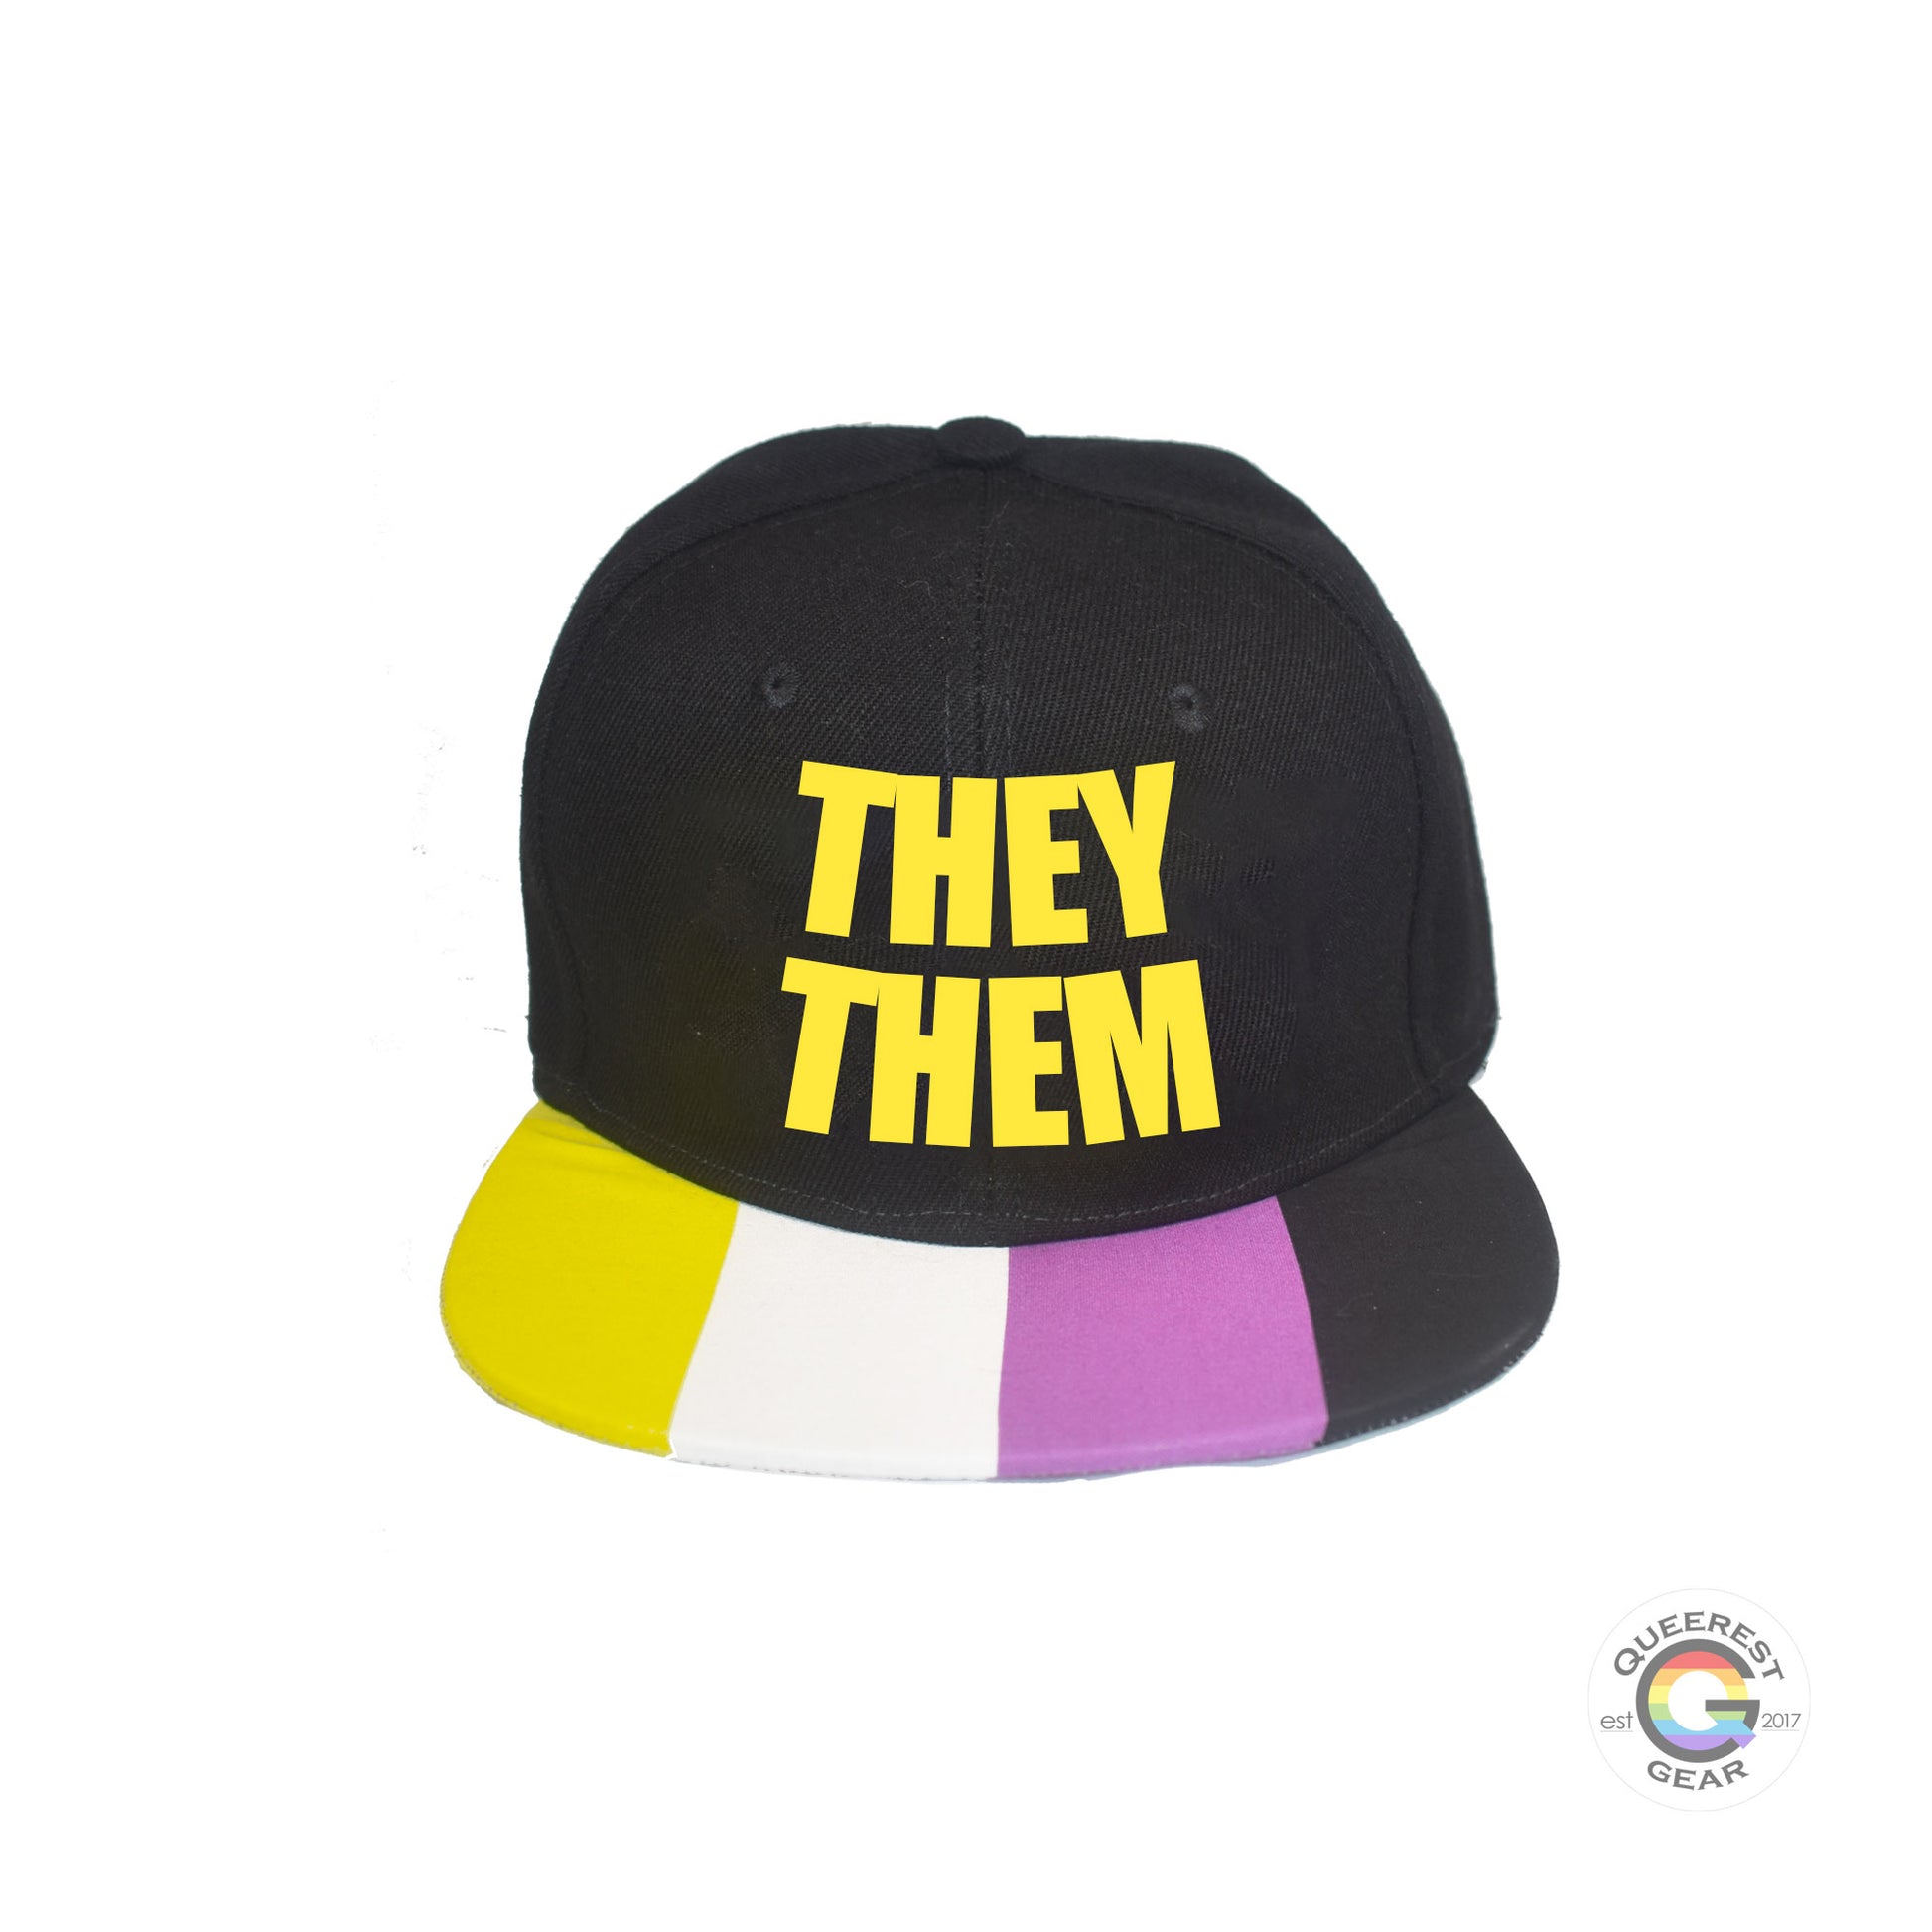 Custom black flat bill snapback hat. The brim has the nonbinary pride flag on both sides and the front of the hat has the phrase “they them” in yellow. Front view